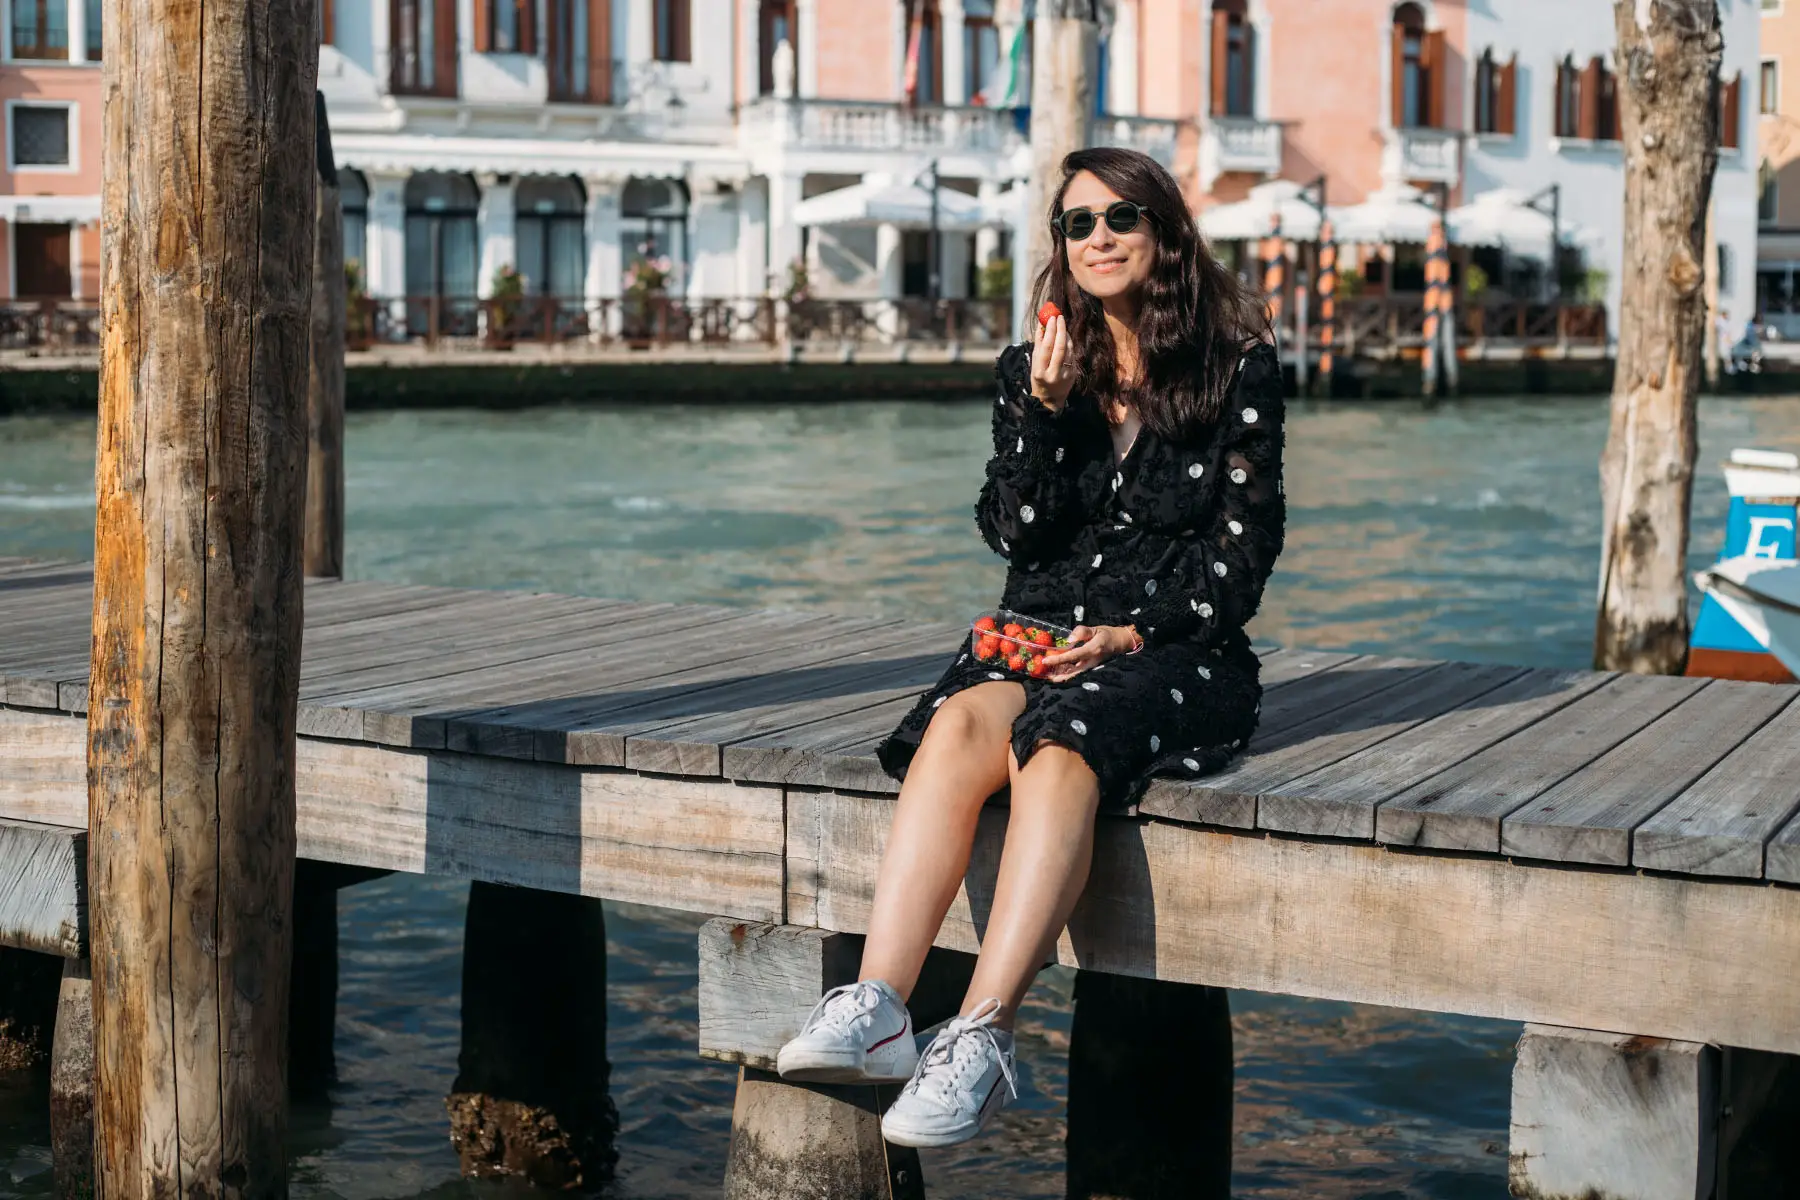 Woman in black sitting on the docks and eating strawberries in Venice, Italy.